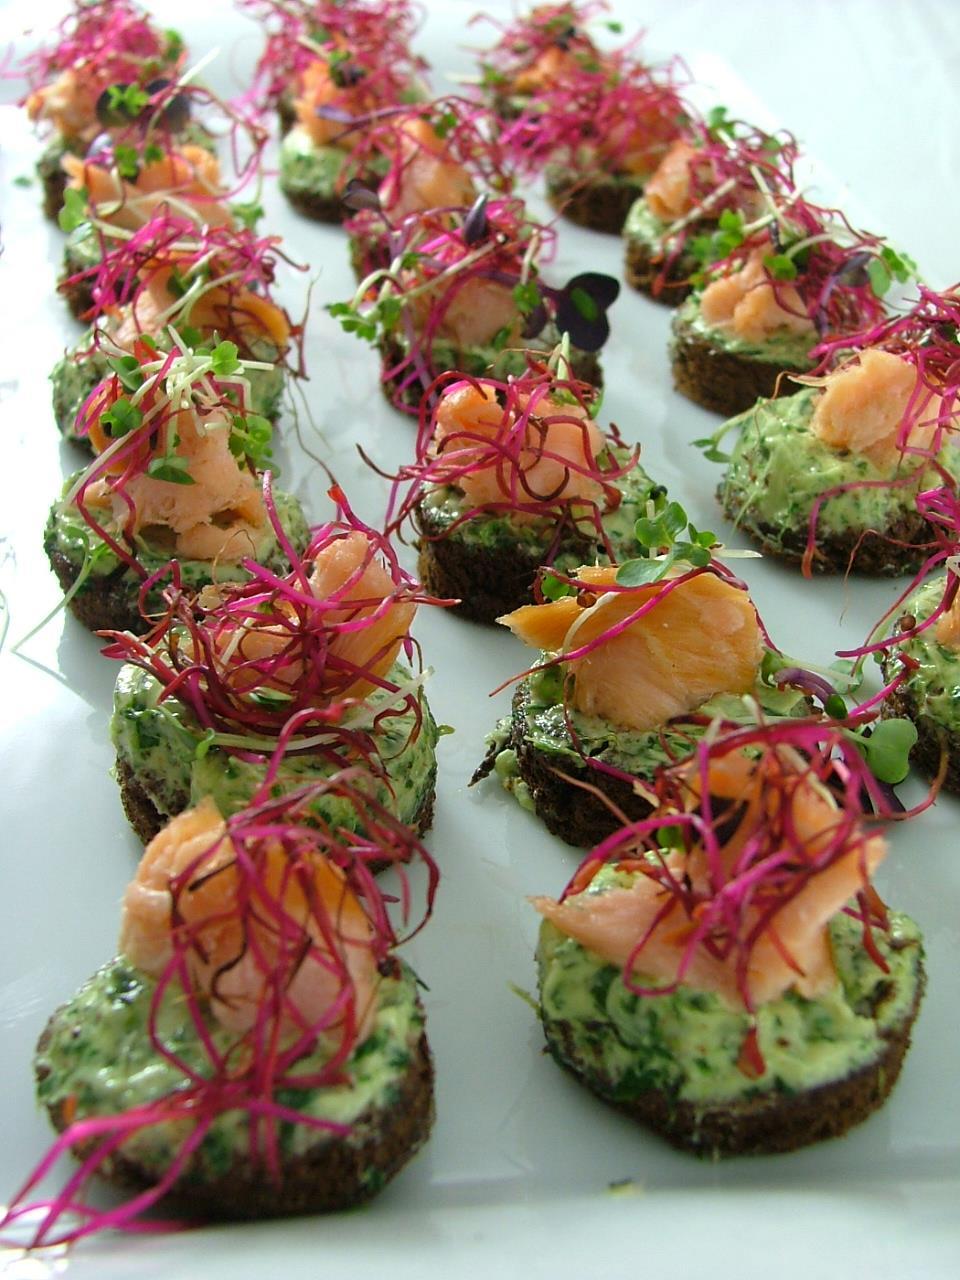 Canapés Canapé Selection per canapé per person choose 6 Smoked salmon in charcoal cup with horseradish cream Rare roast mustard beef & watercress on sourdough Smoked chicken, crushed white bean &